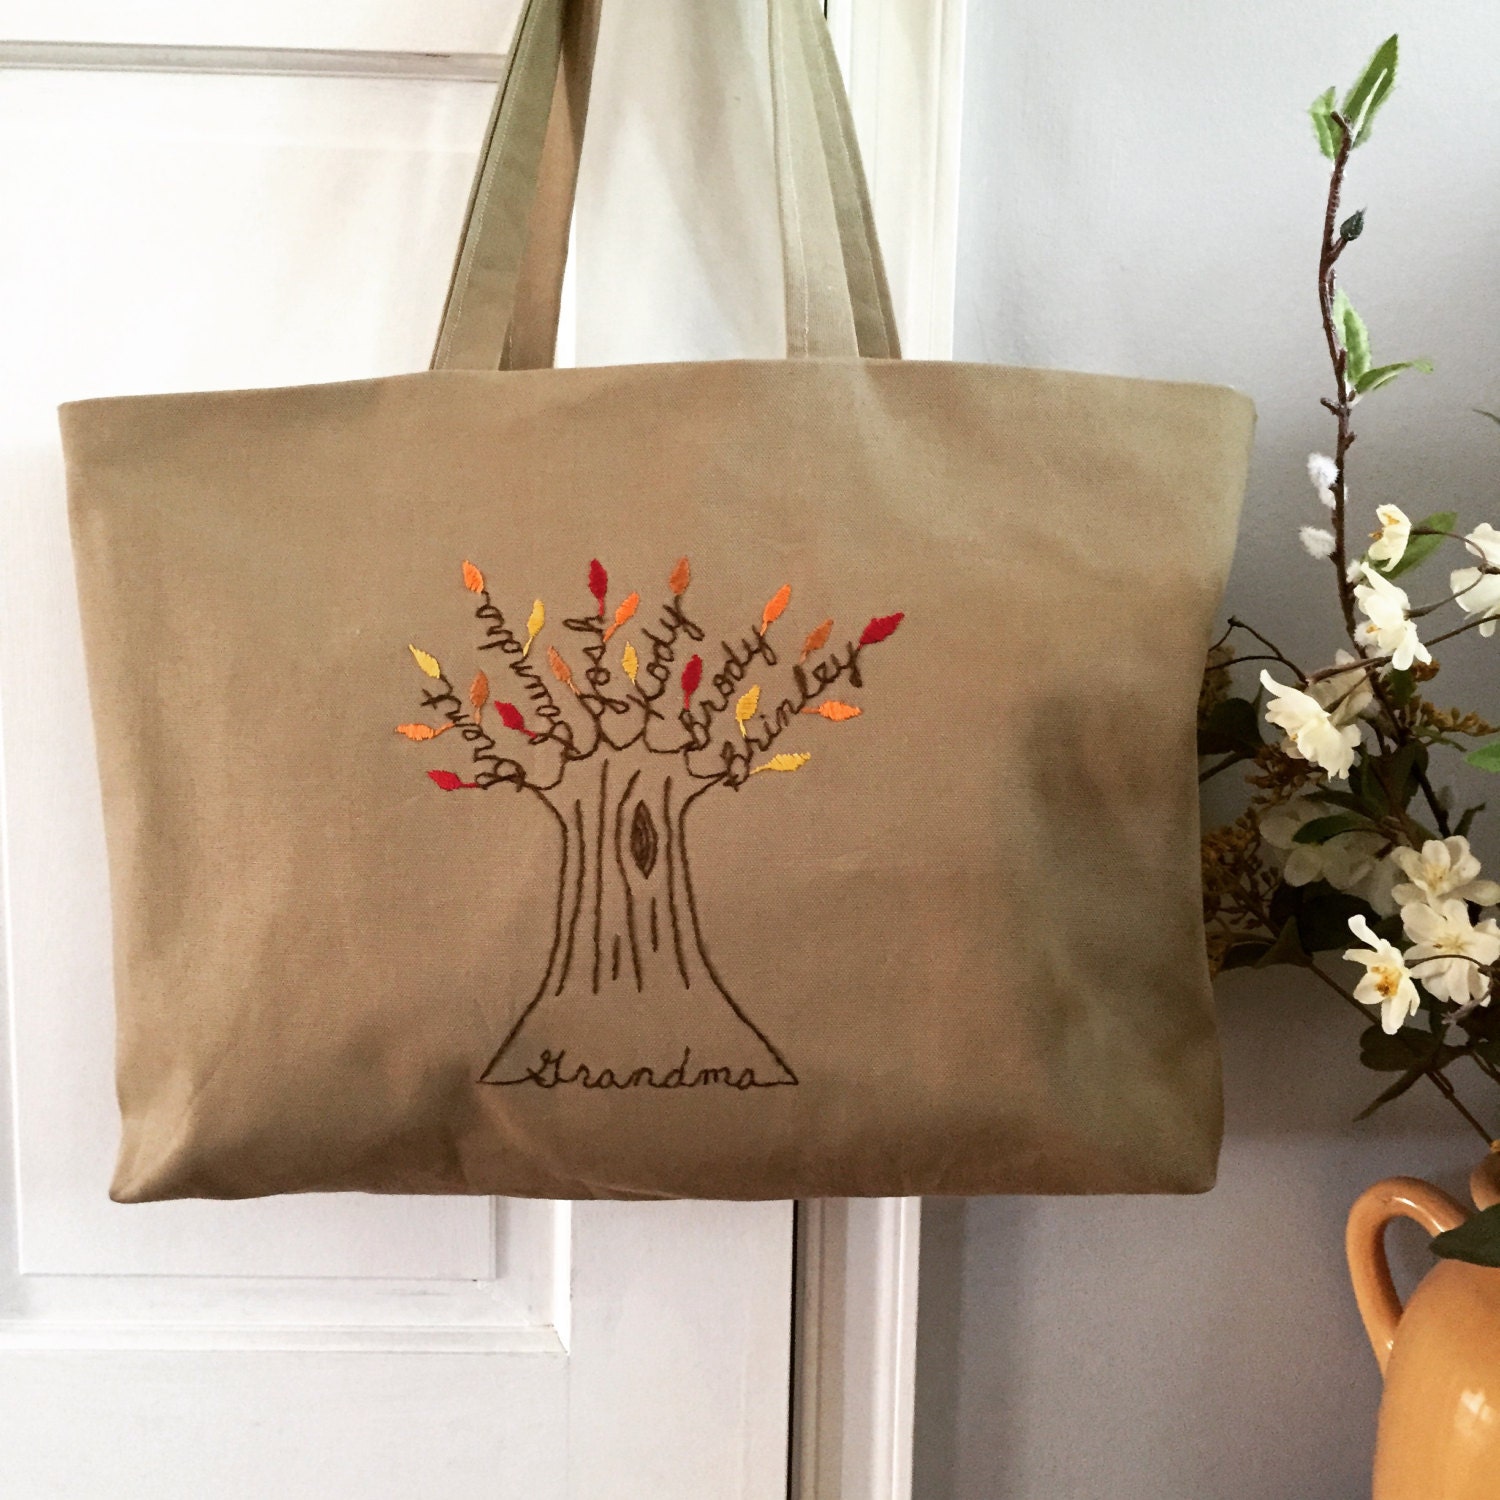 Tote Bag Personalized. Fall Bags. Family Tree Personalized | Etsy